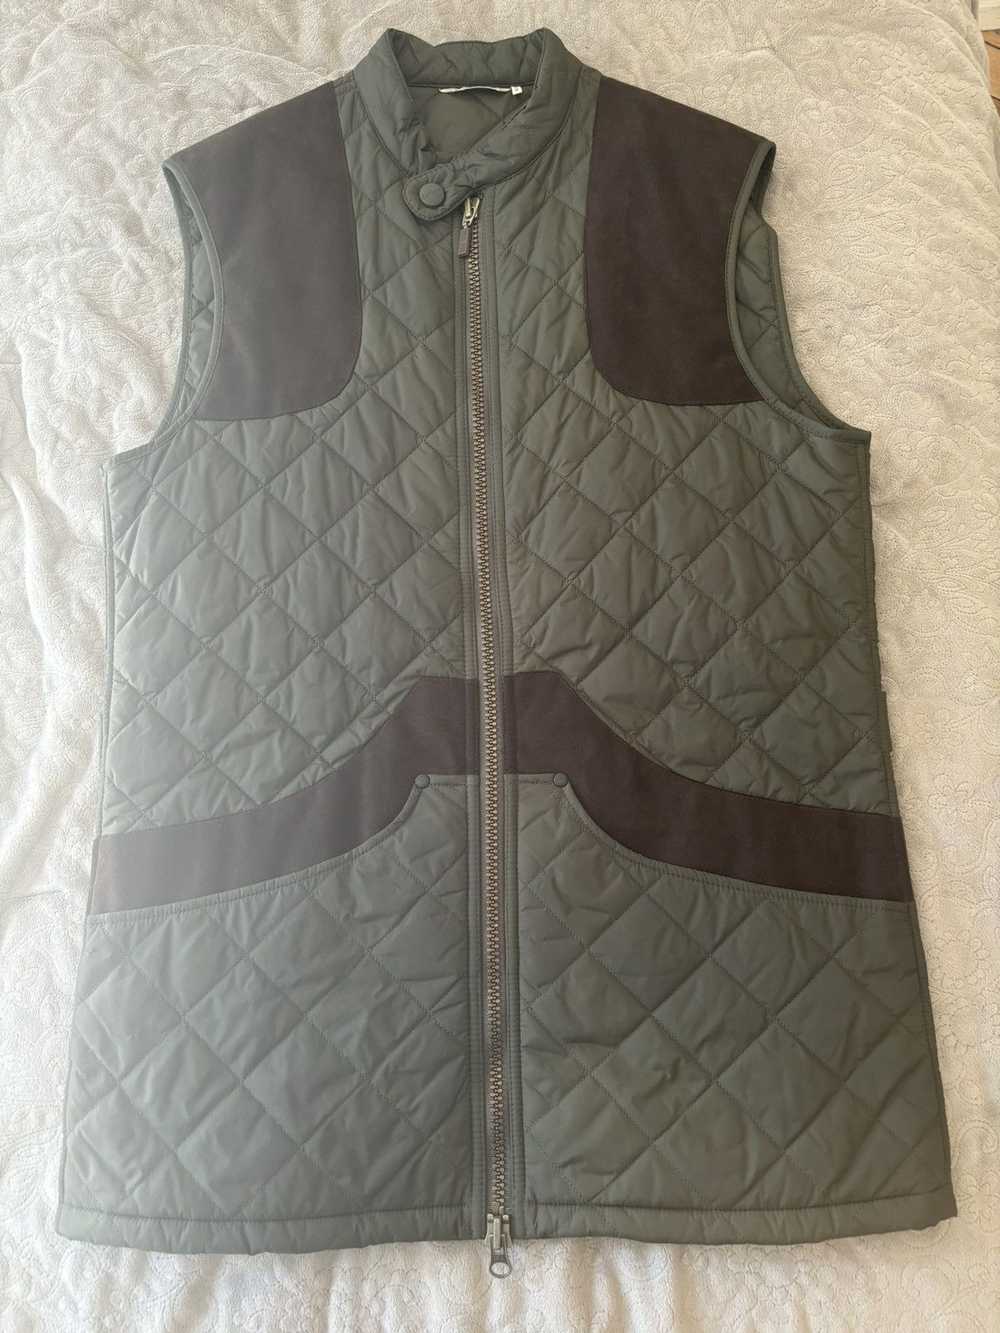 Barbour Barbour Quilted Gilet - Size Small - image 1